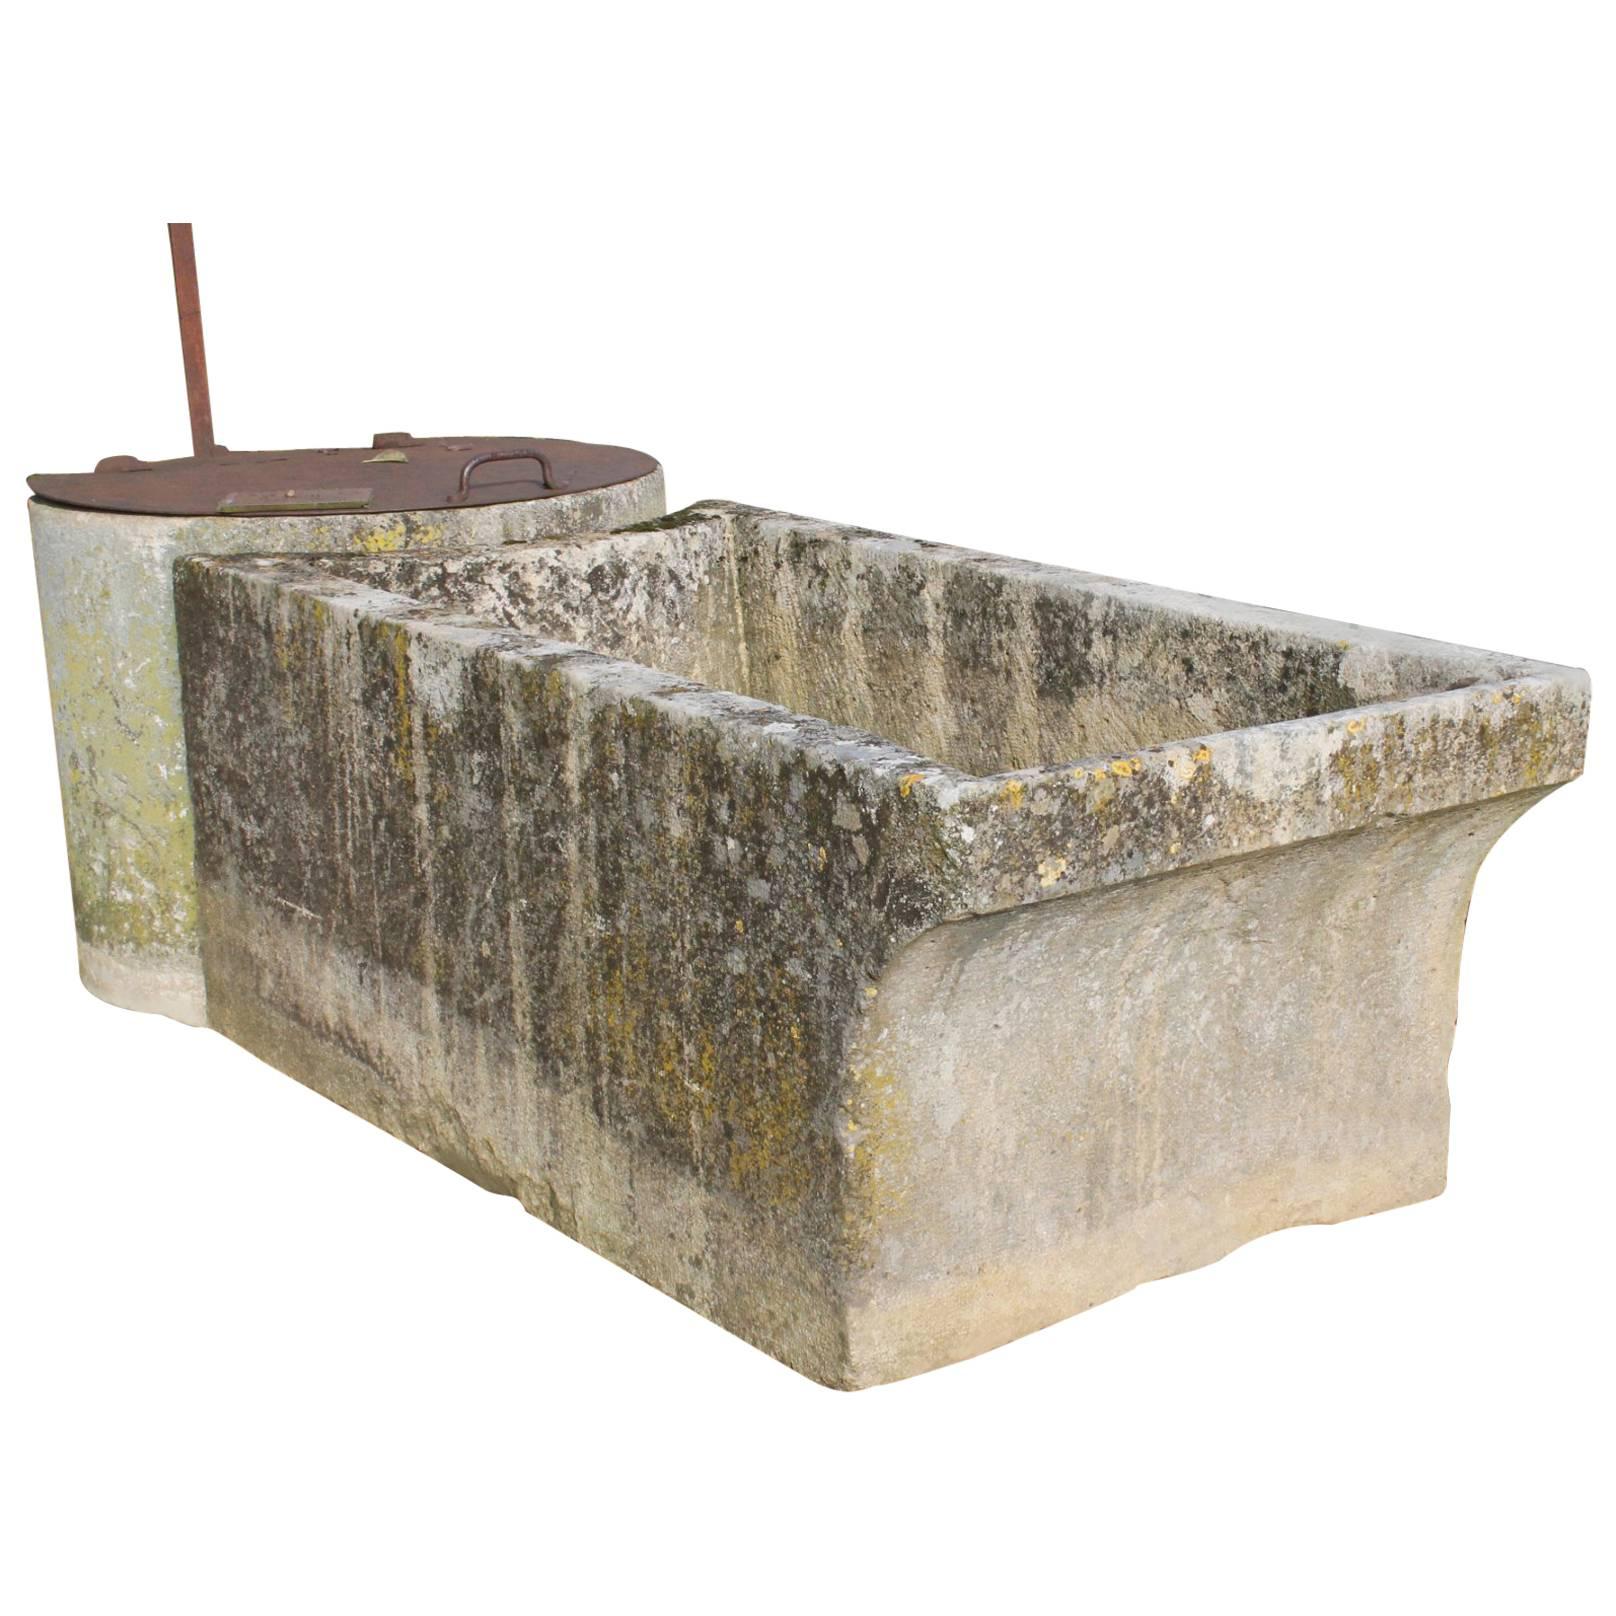 Antique Trough and Well from the Early 18th Century